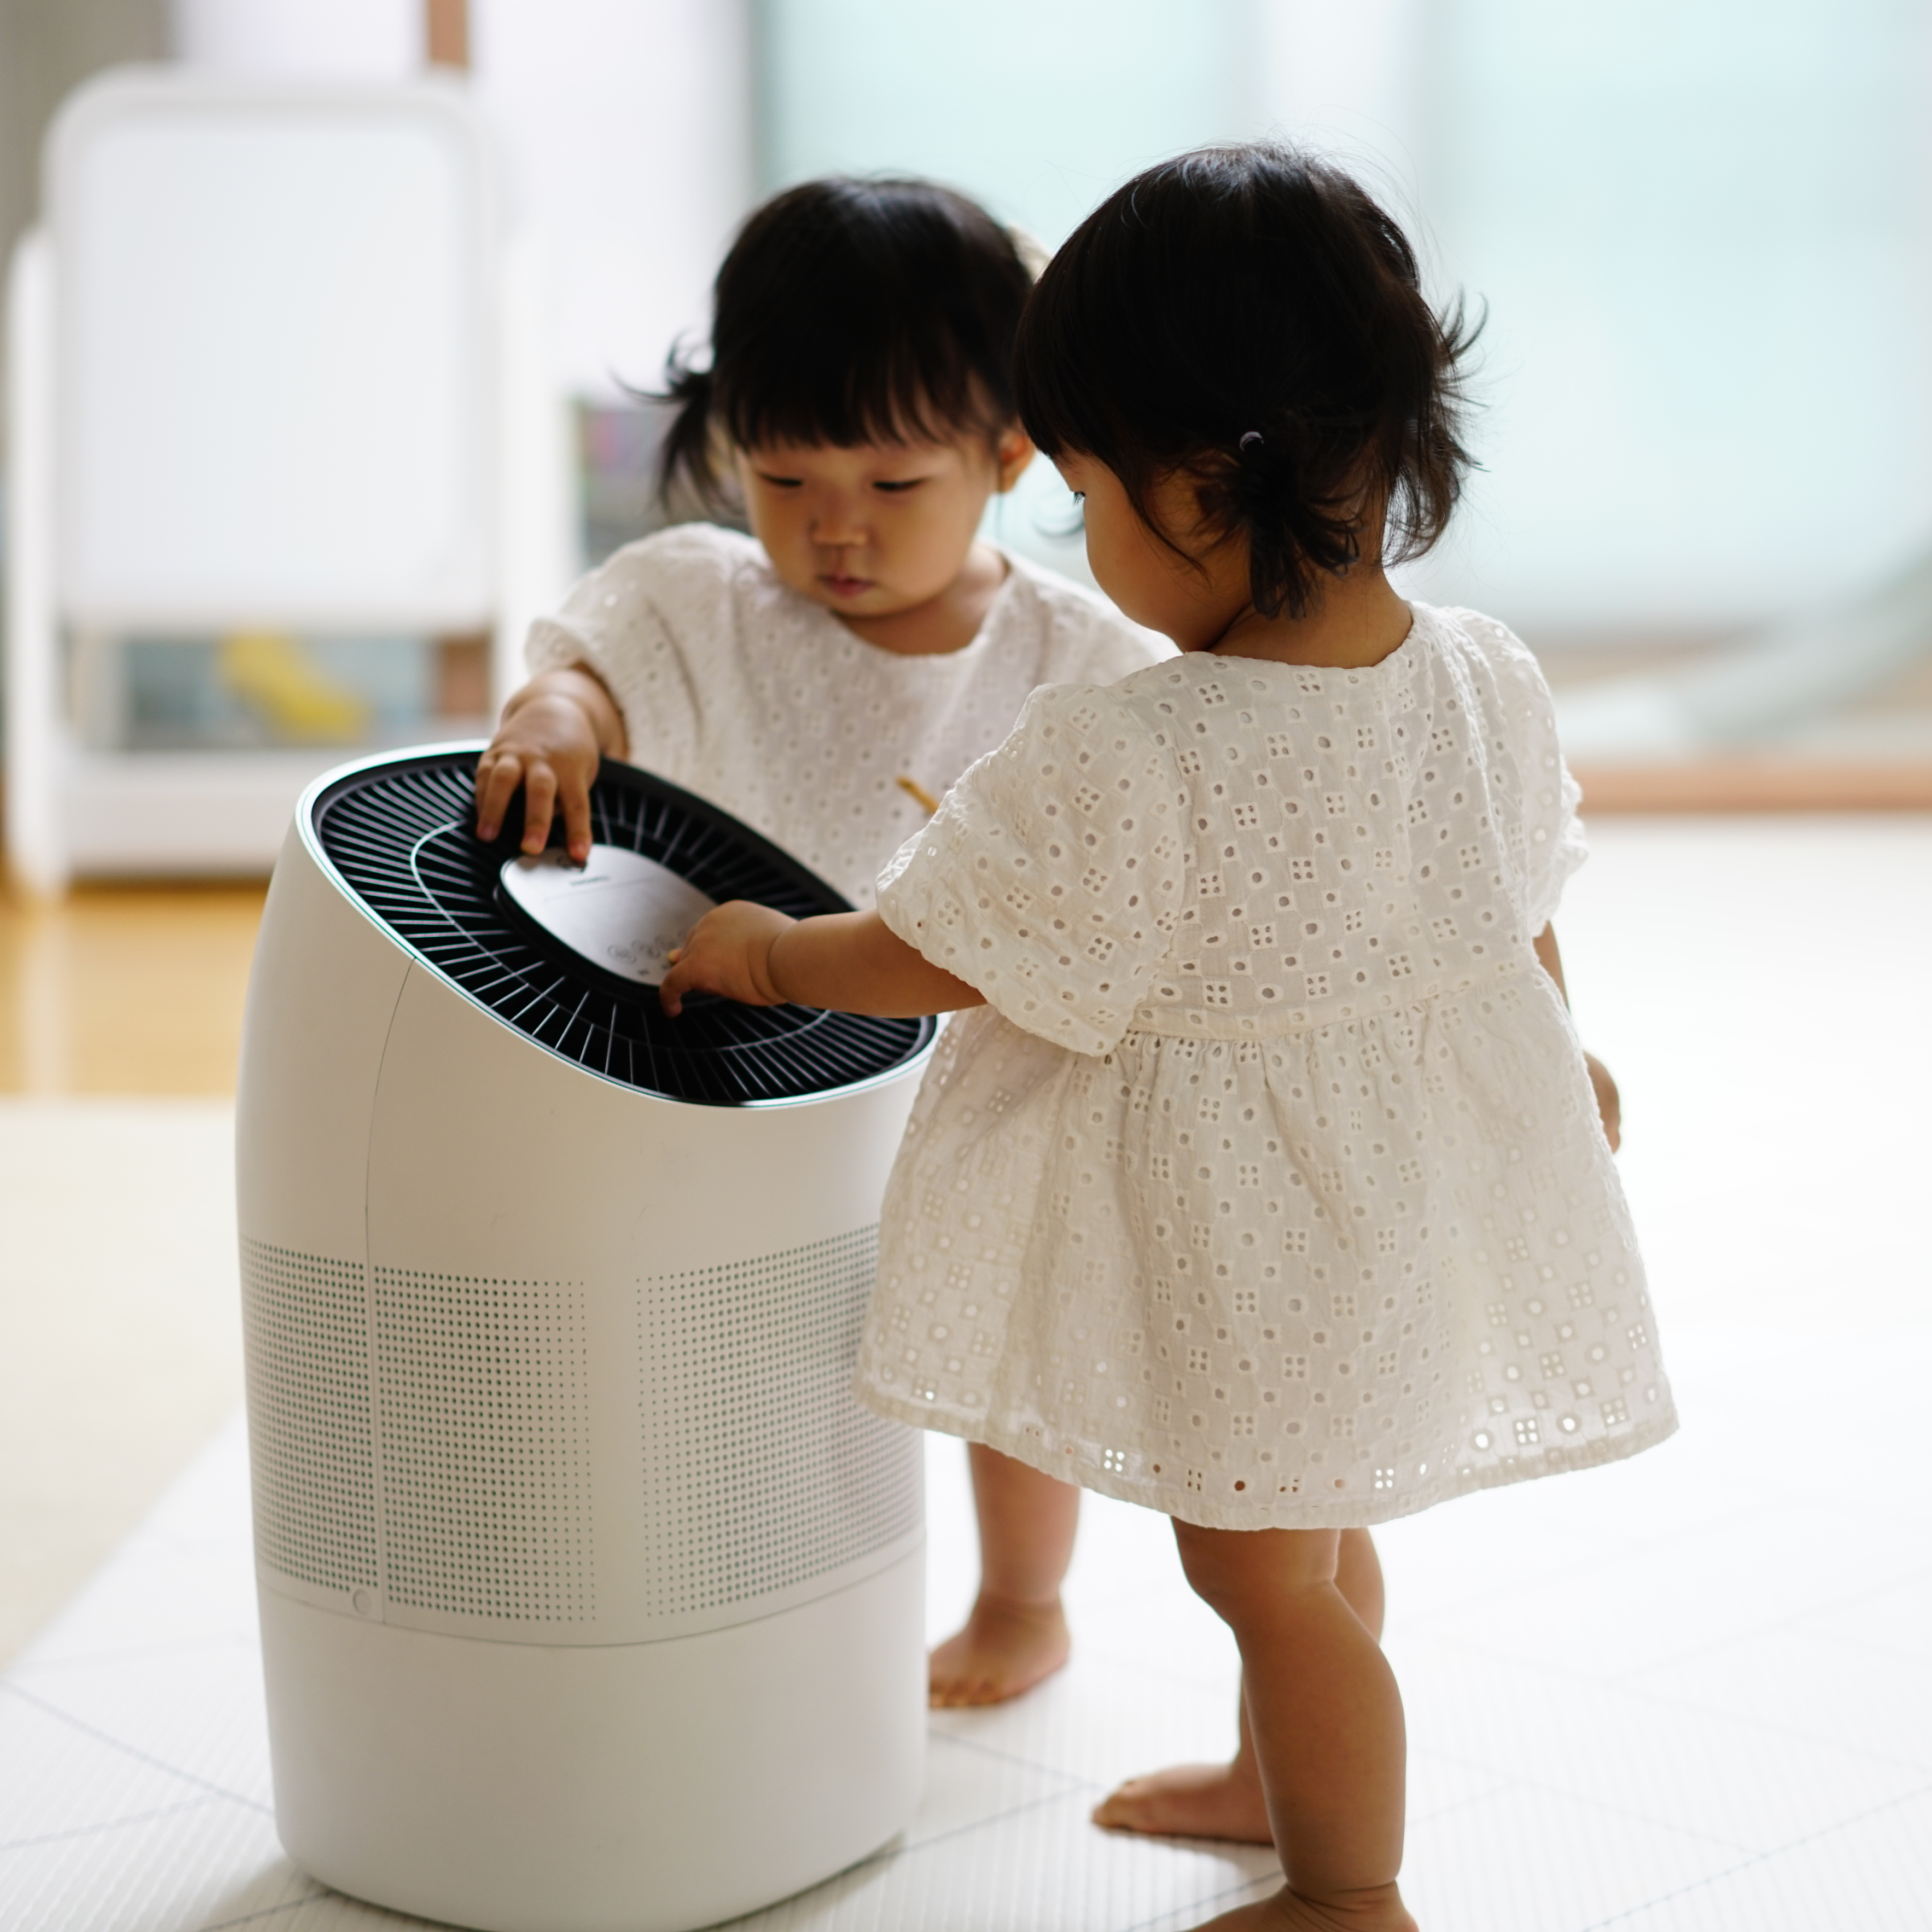 Two twin girl toddlers curiously touching Zenwell Super Humidifier touch display